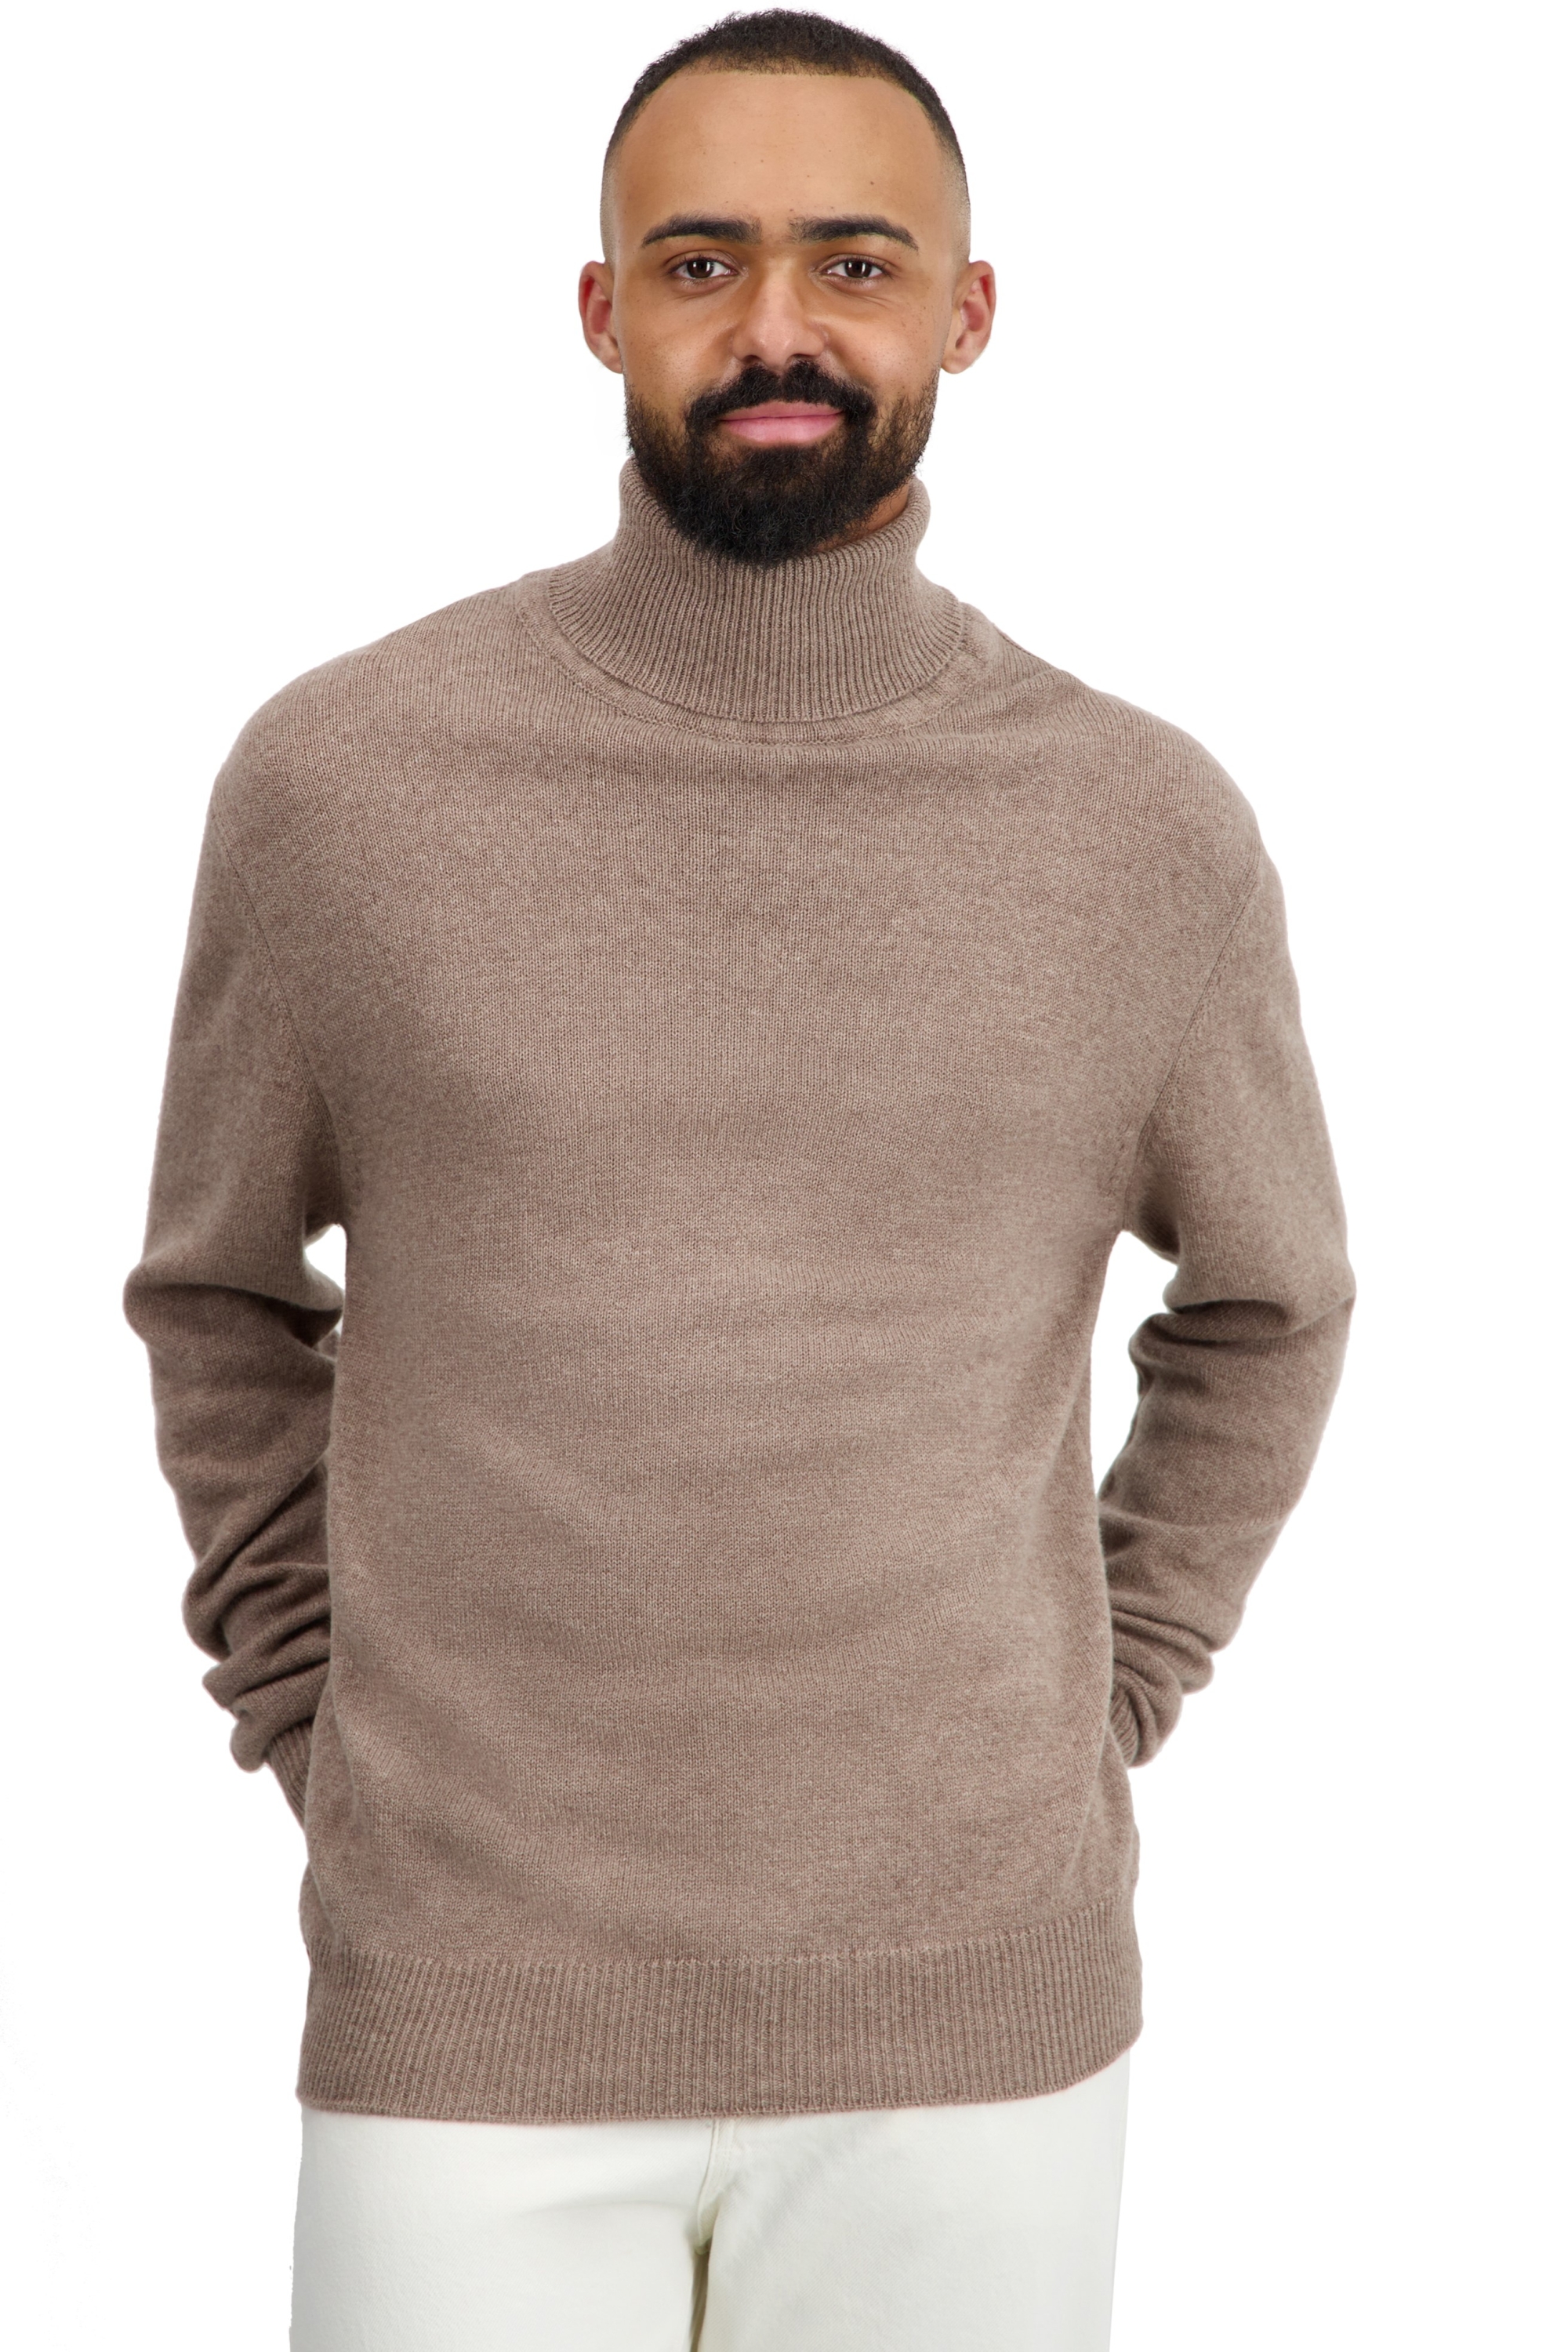 Cachemire pull homme col roule edgar 4f natural terra 3xl